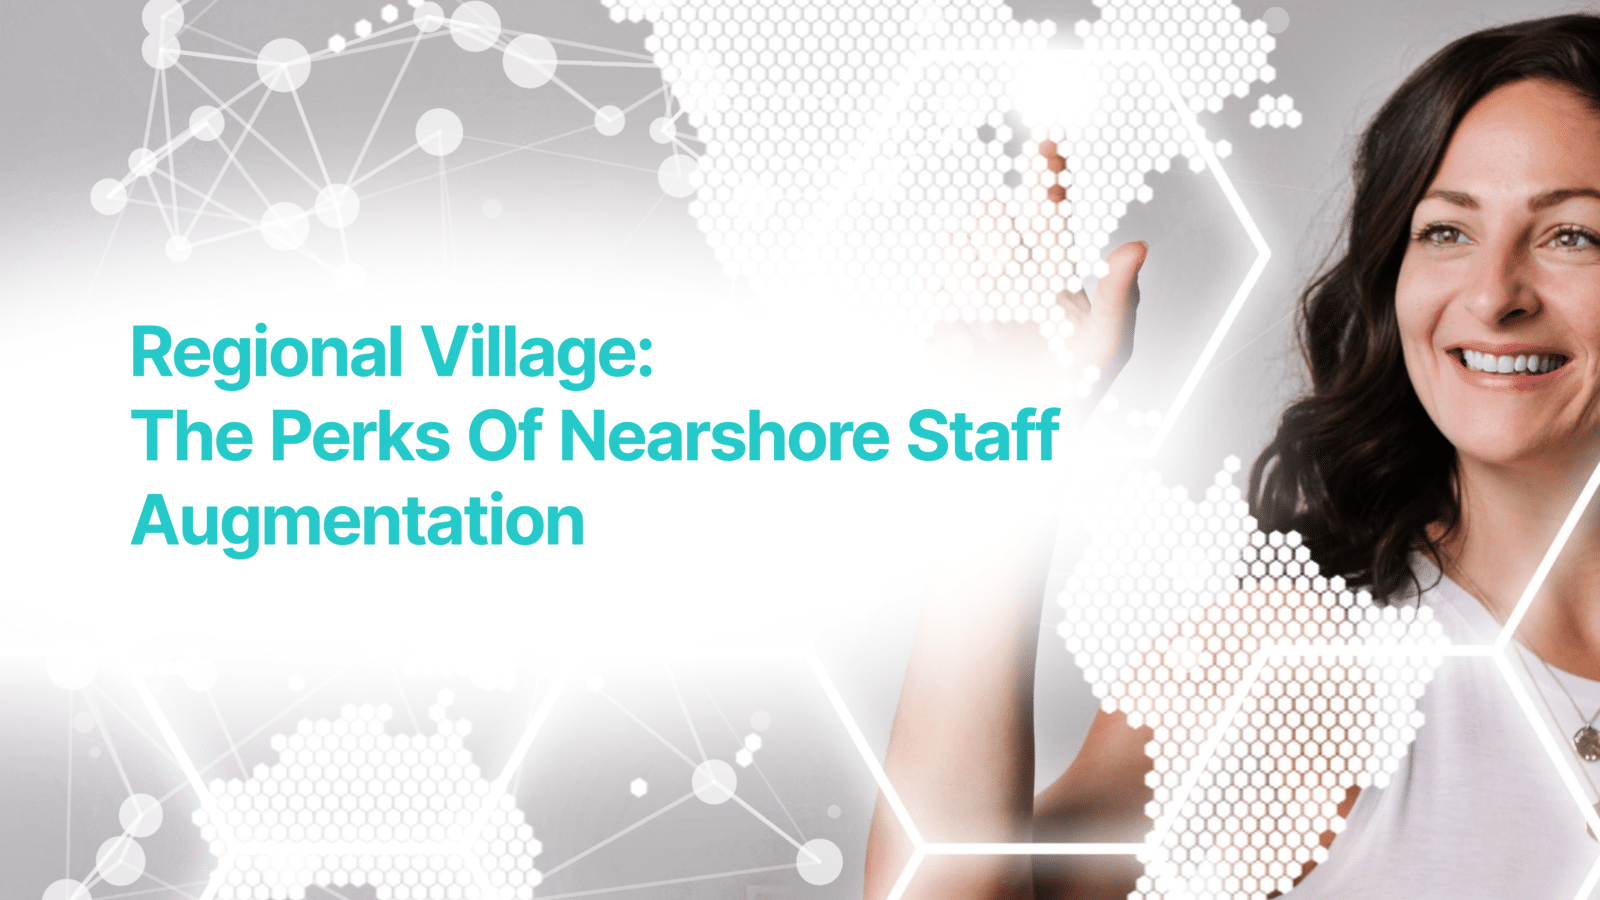 Benefits of nearshore staff augmentation for IT projects